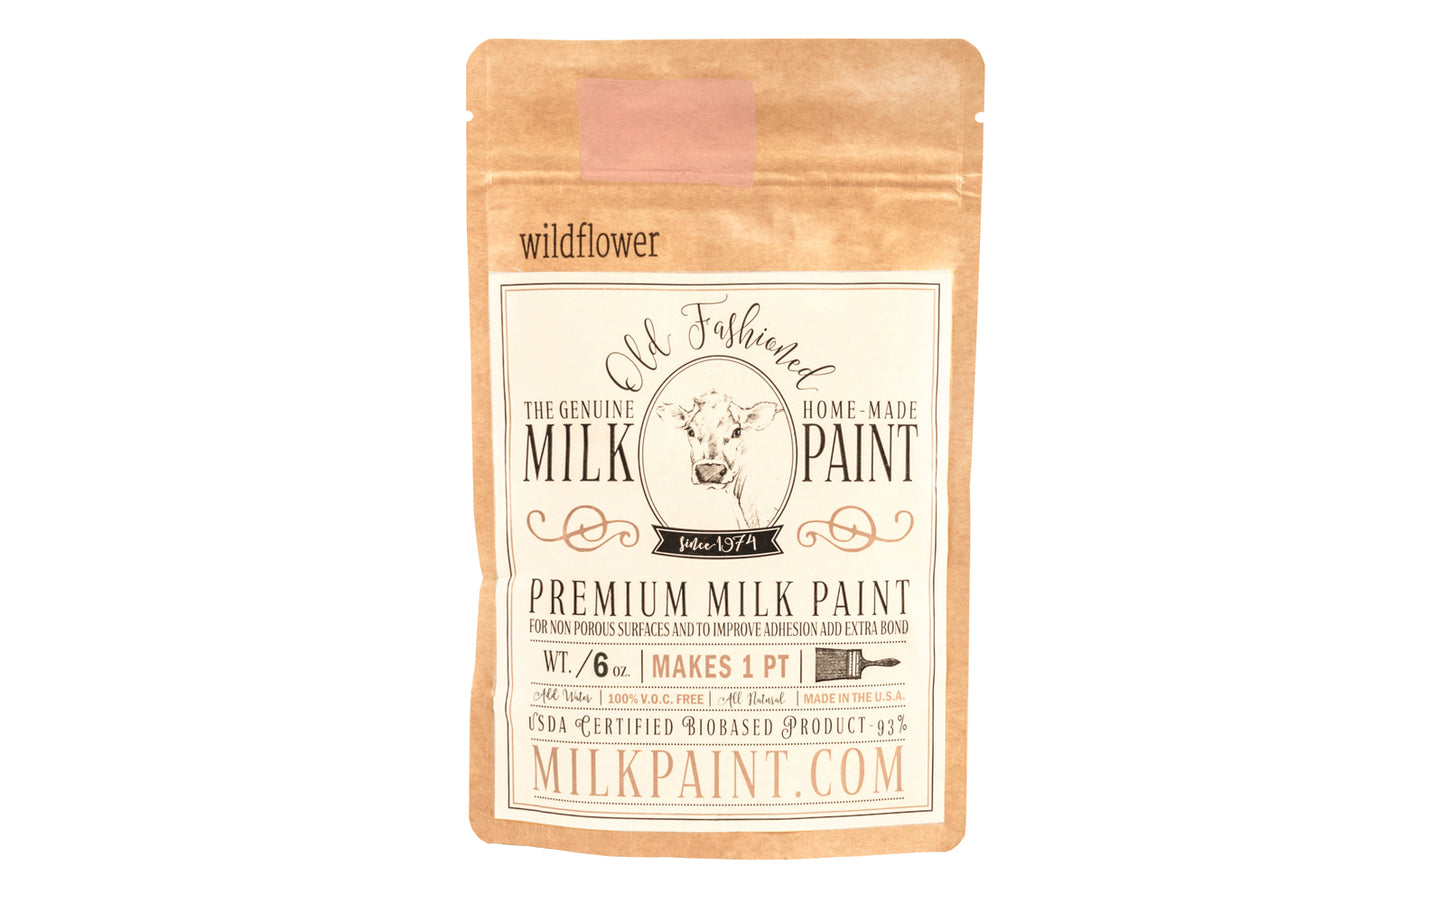 This Milk Paint color is "Wildflower" - Soft dusty rose pink. Comes in a powder form, you can control how thick/thin you mix the paint. Use it as you would regular paint, thinner for a wash/stain or thicker to create texture. Environmentally safe, non-toxic & is food safe. 100% VOC free. Powder Paint